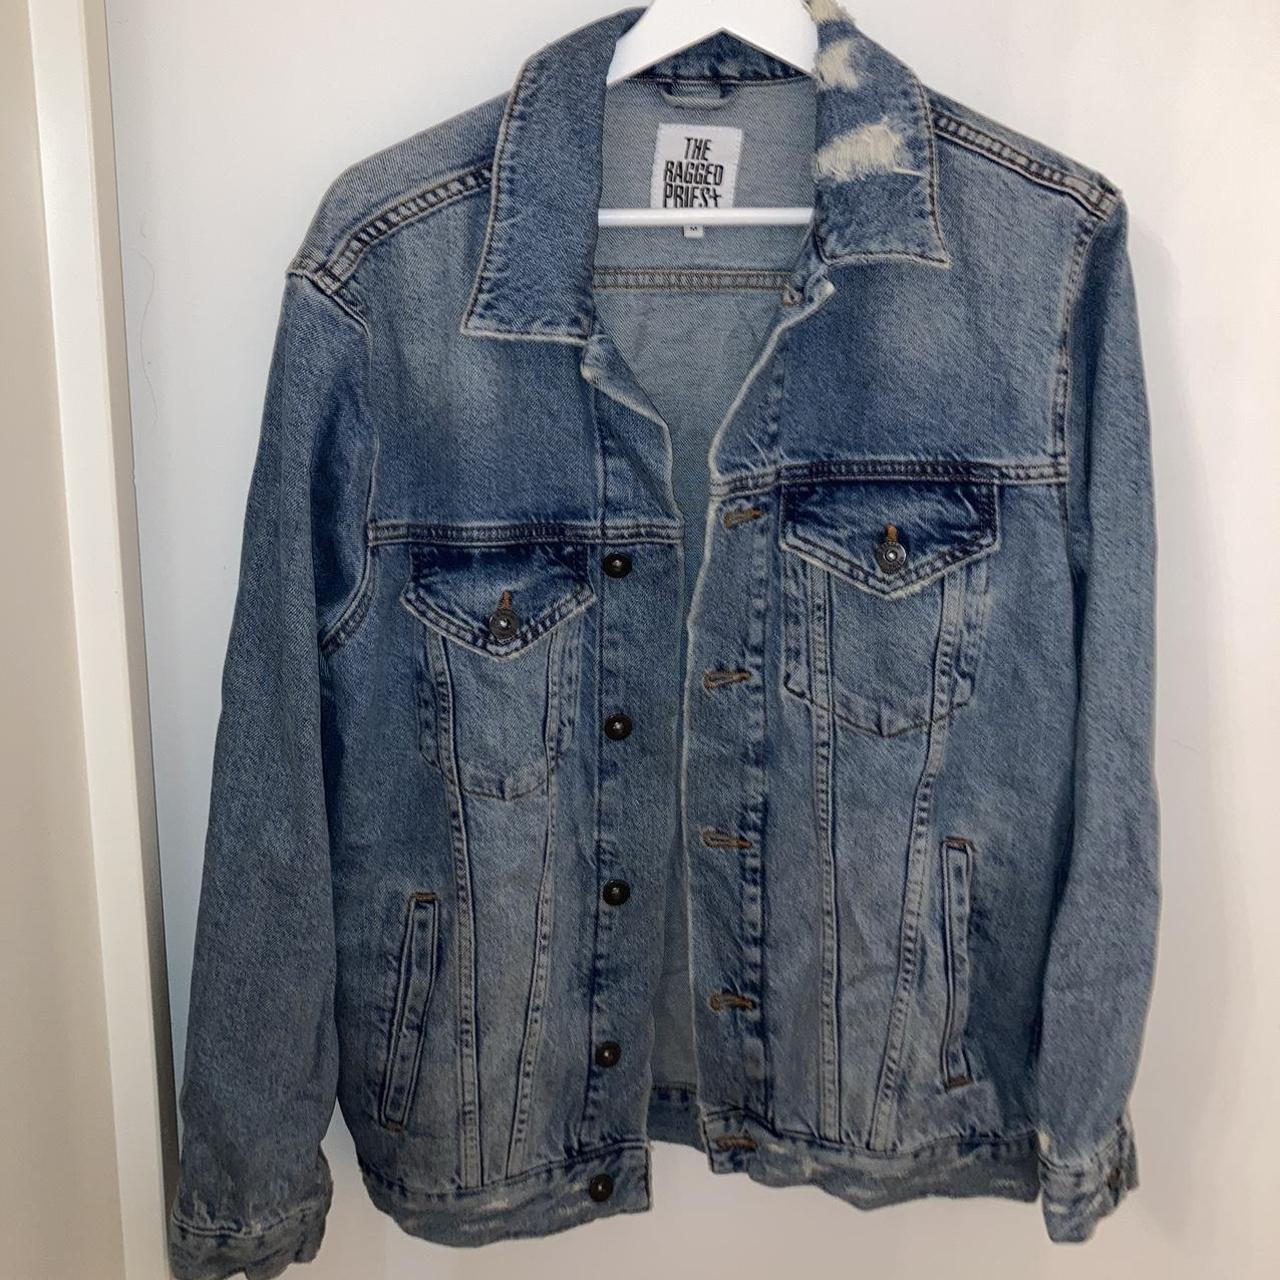 The Ragged Priest Distressed Denim Jacket With Patches - ShopStyle Clothes  and Shoes | Distressed denim jacket, Denim jacket women, Denim jacket  patches